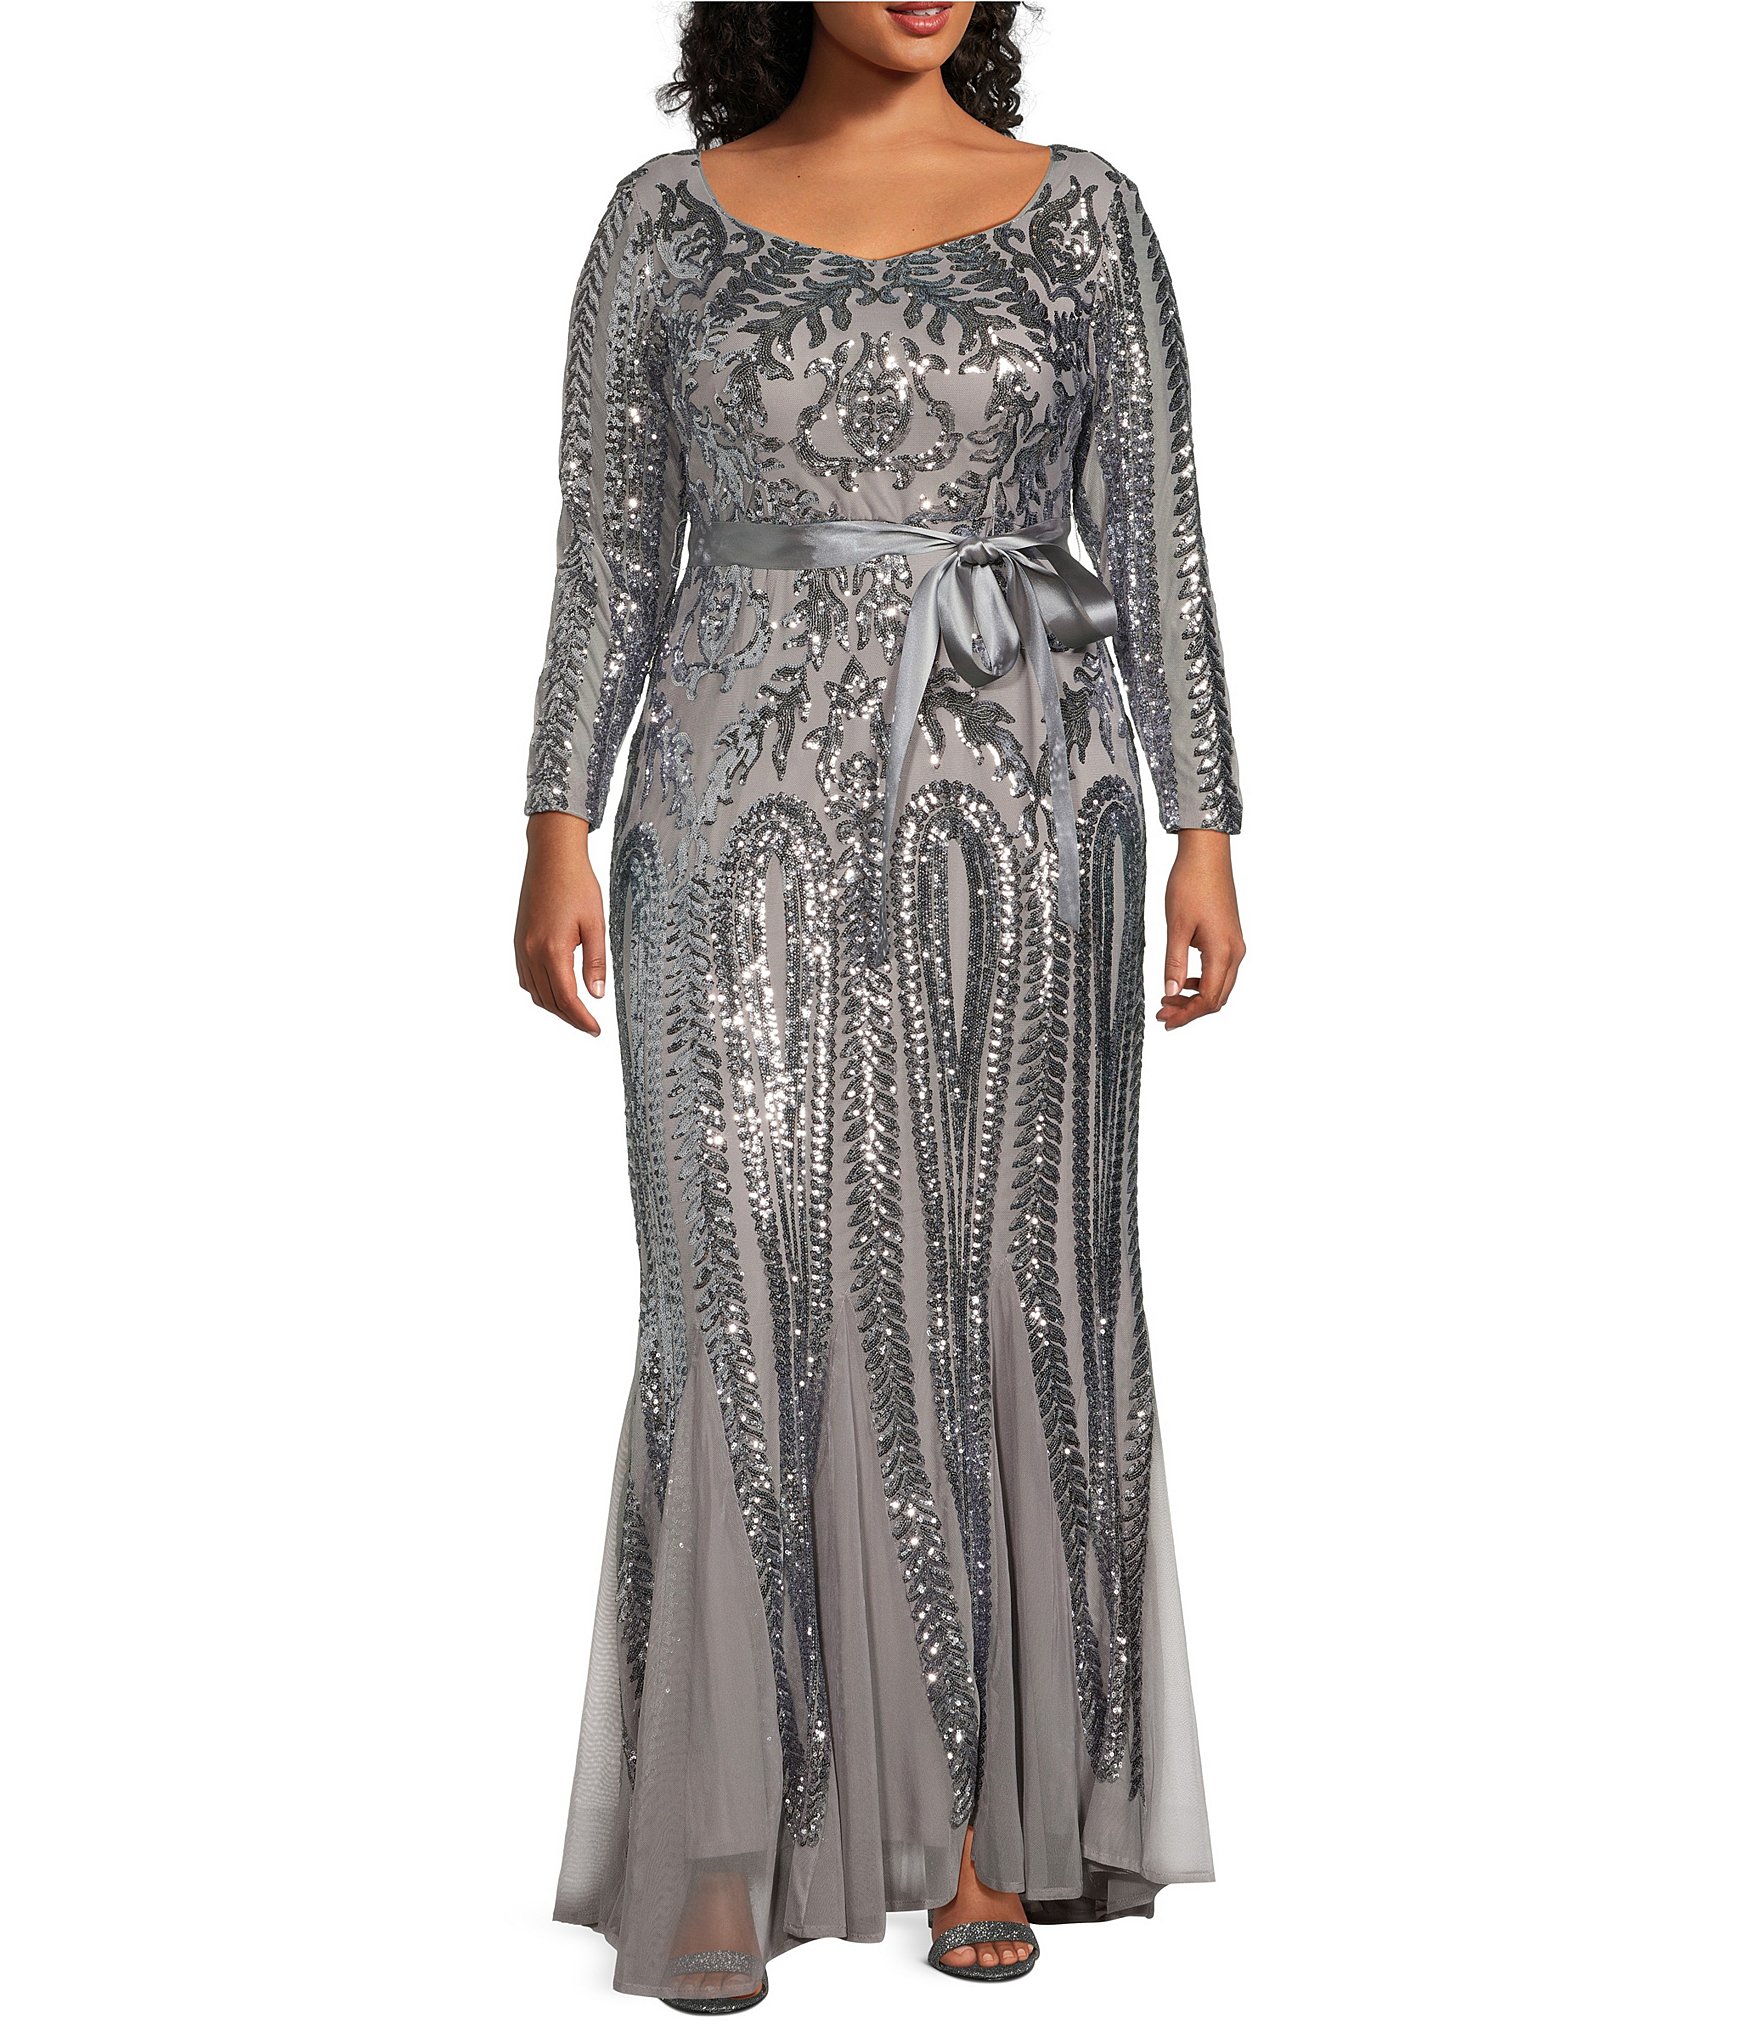 R & M RICHARDS NEW Women's Plus Size Ruched Glitter Gown Dress TEDO 